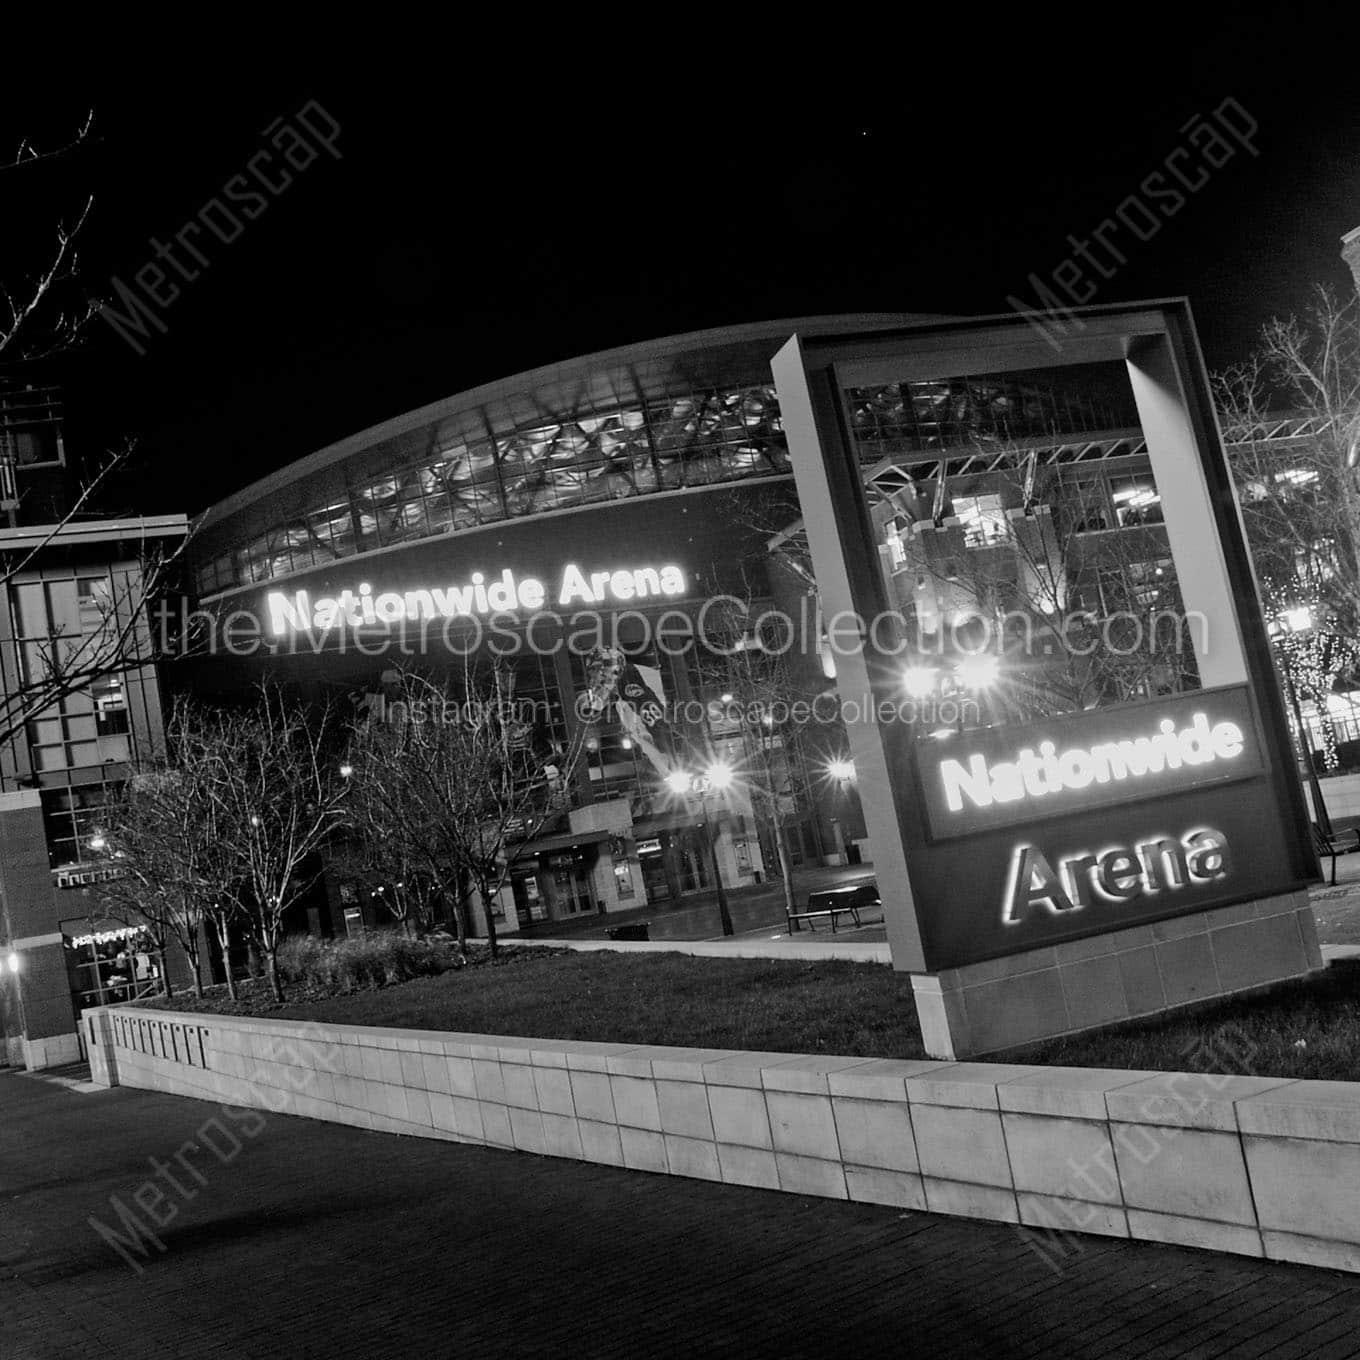 nationwide arena at night Black & White Wall Art